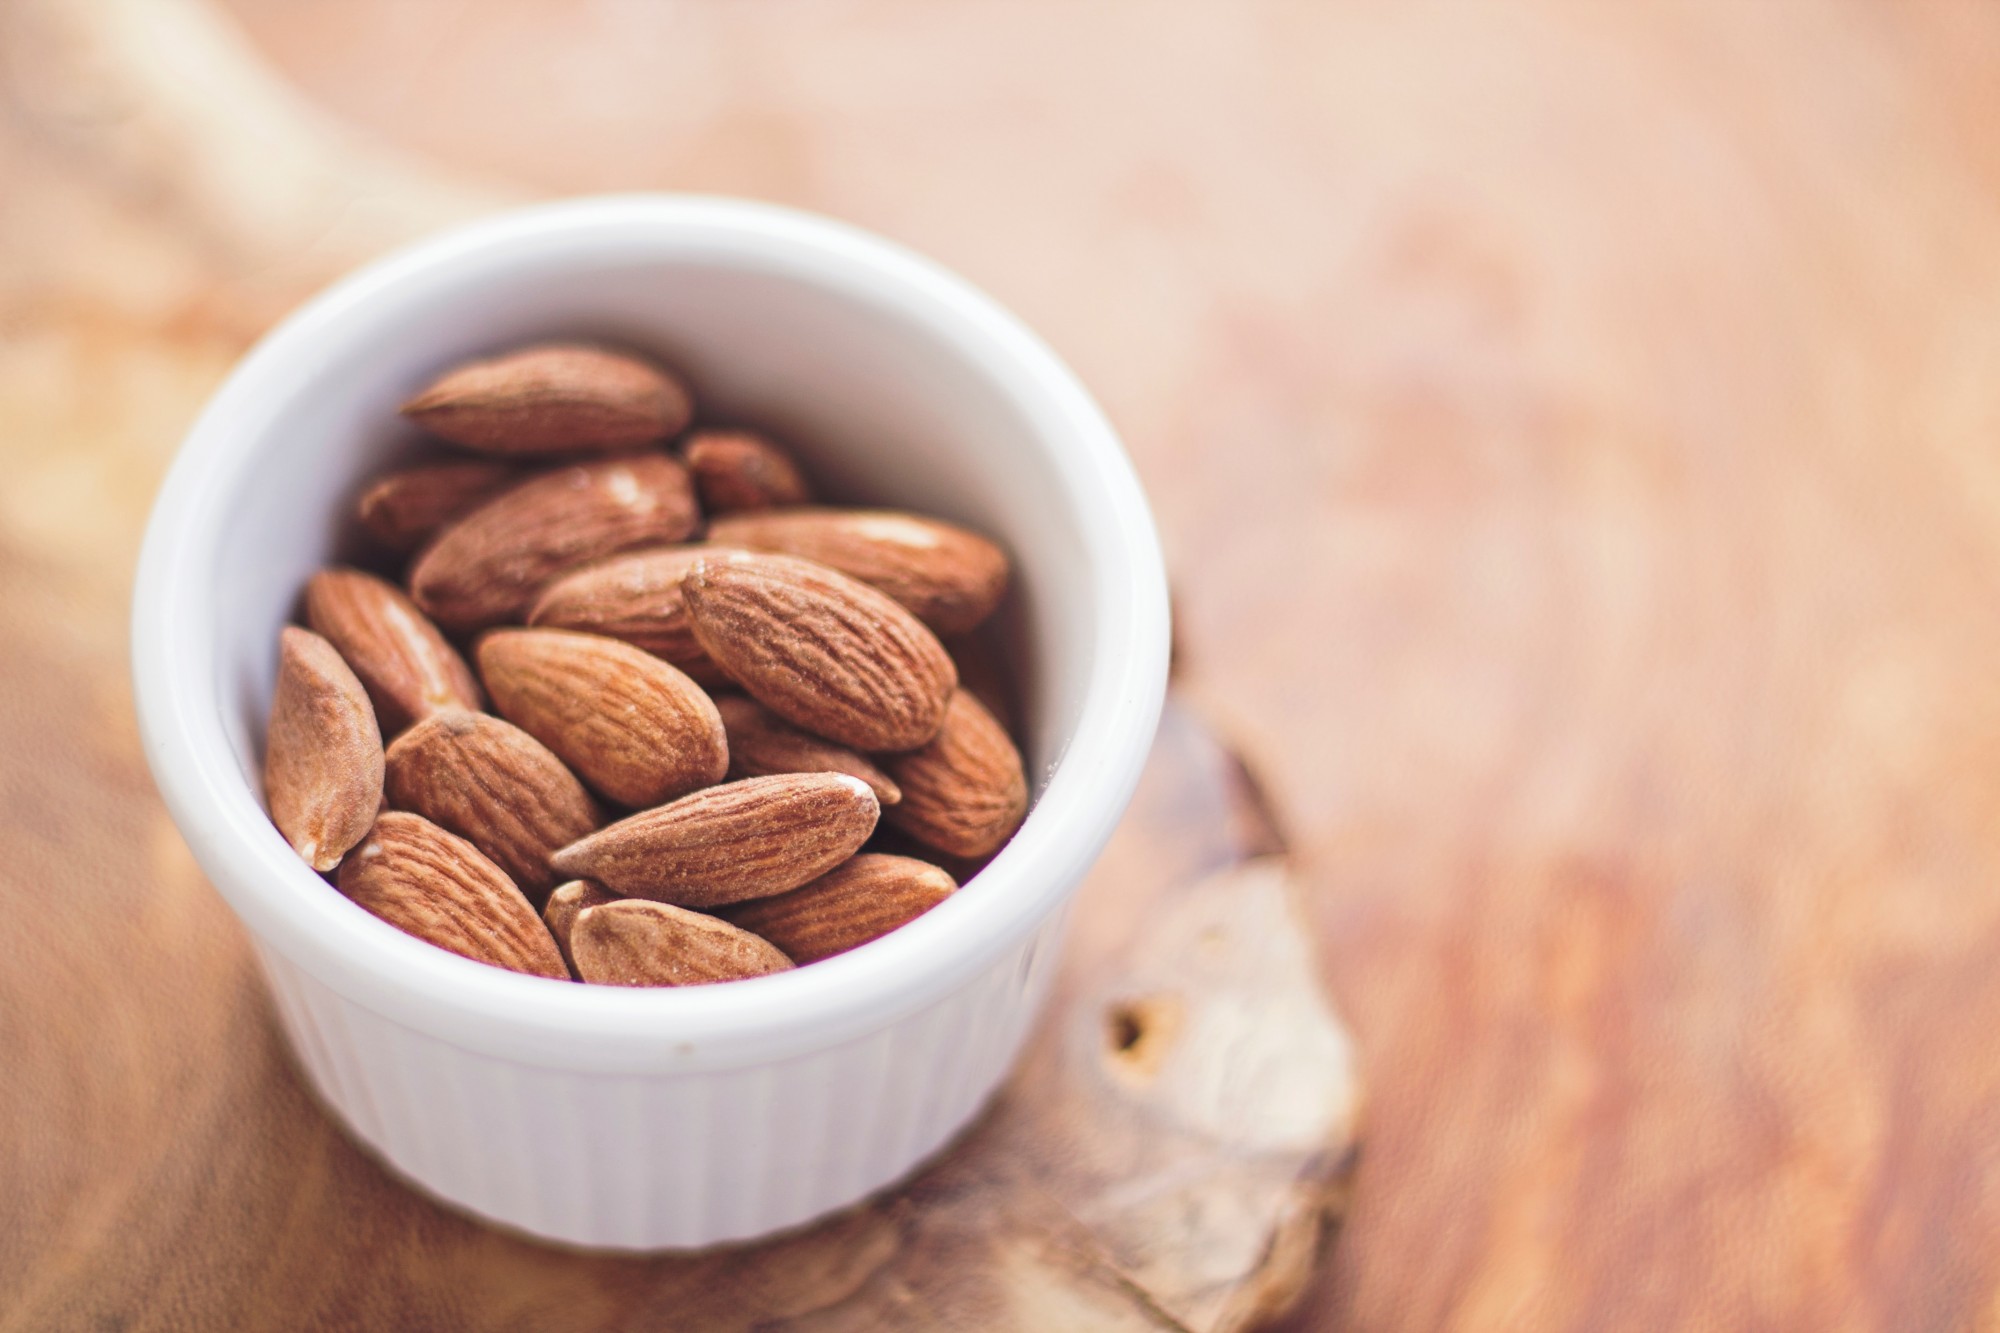 almonds for nutrition during winter activity